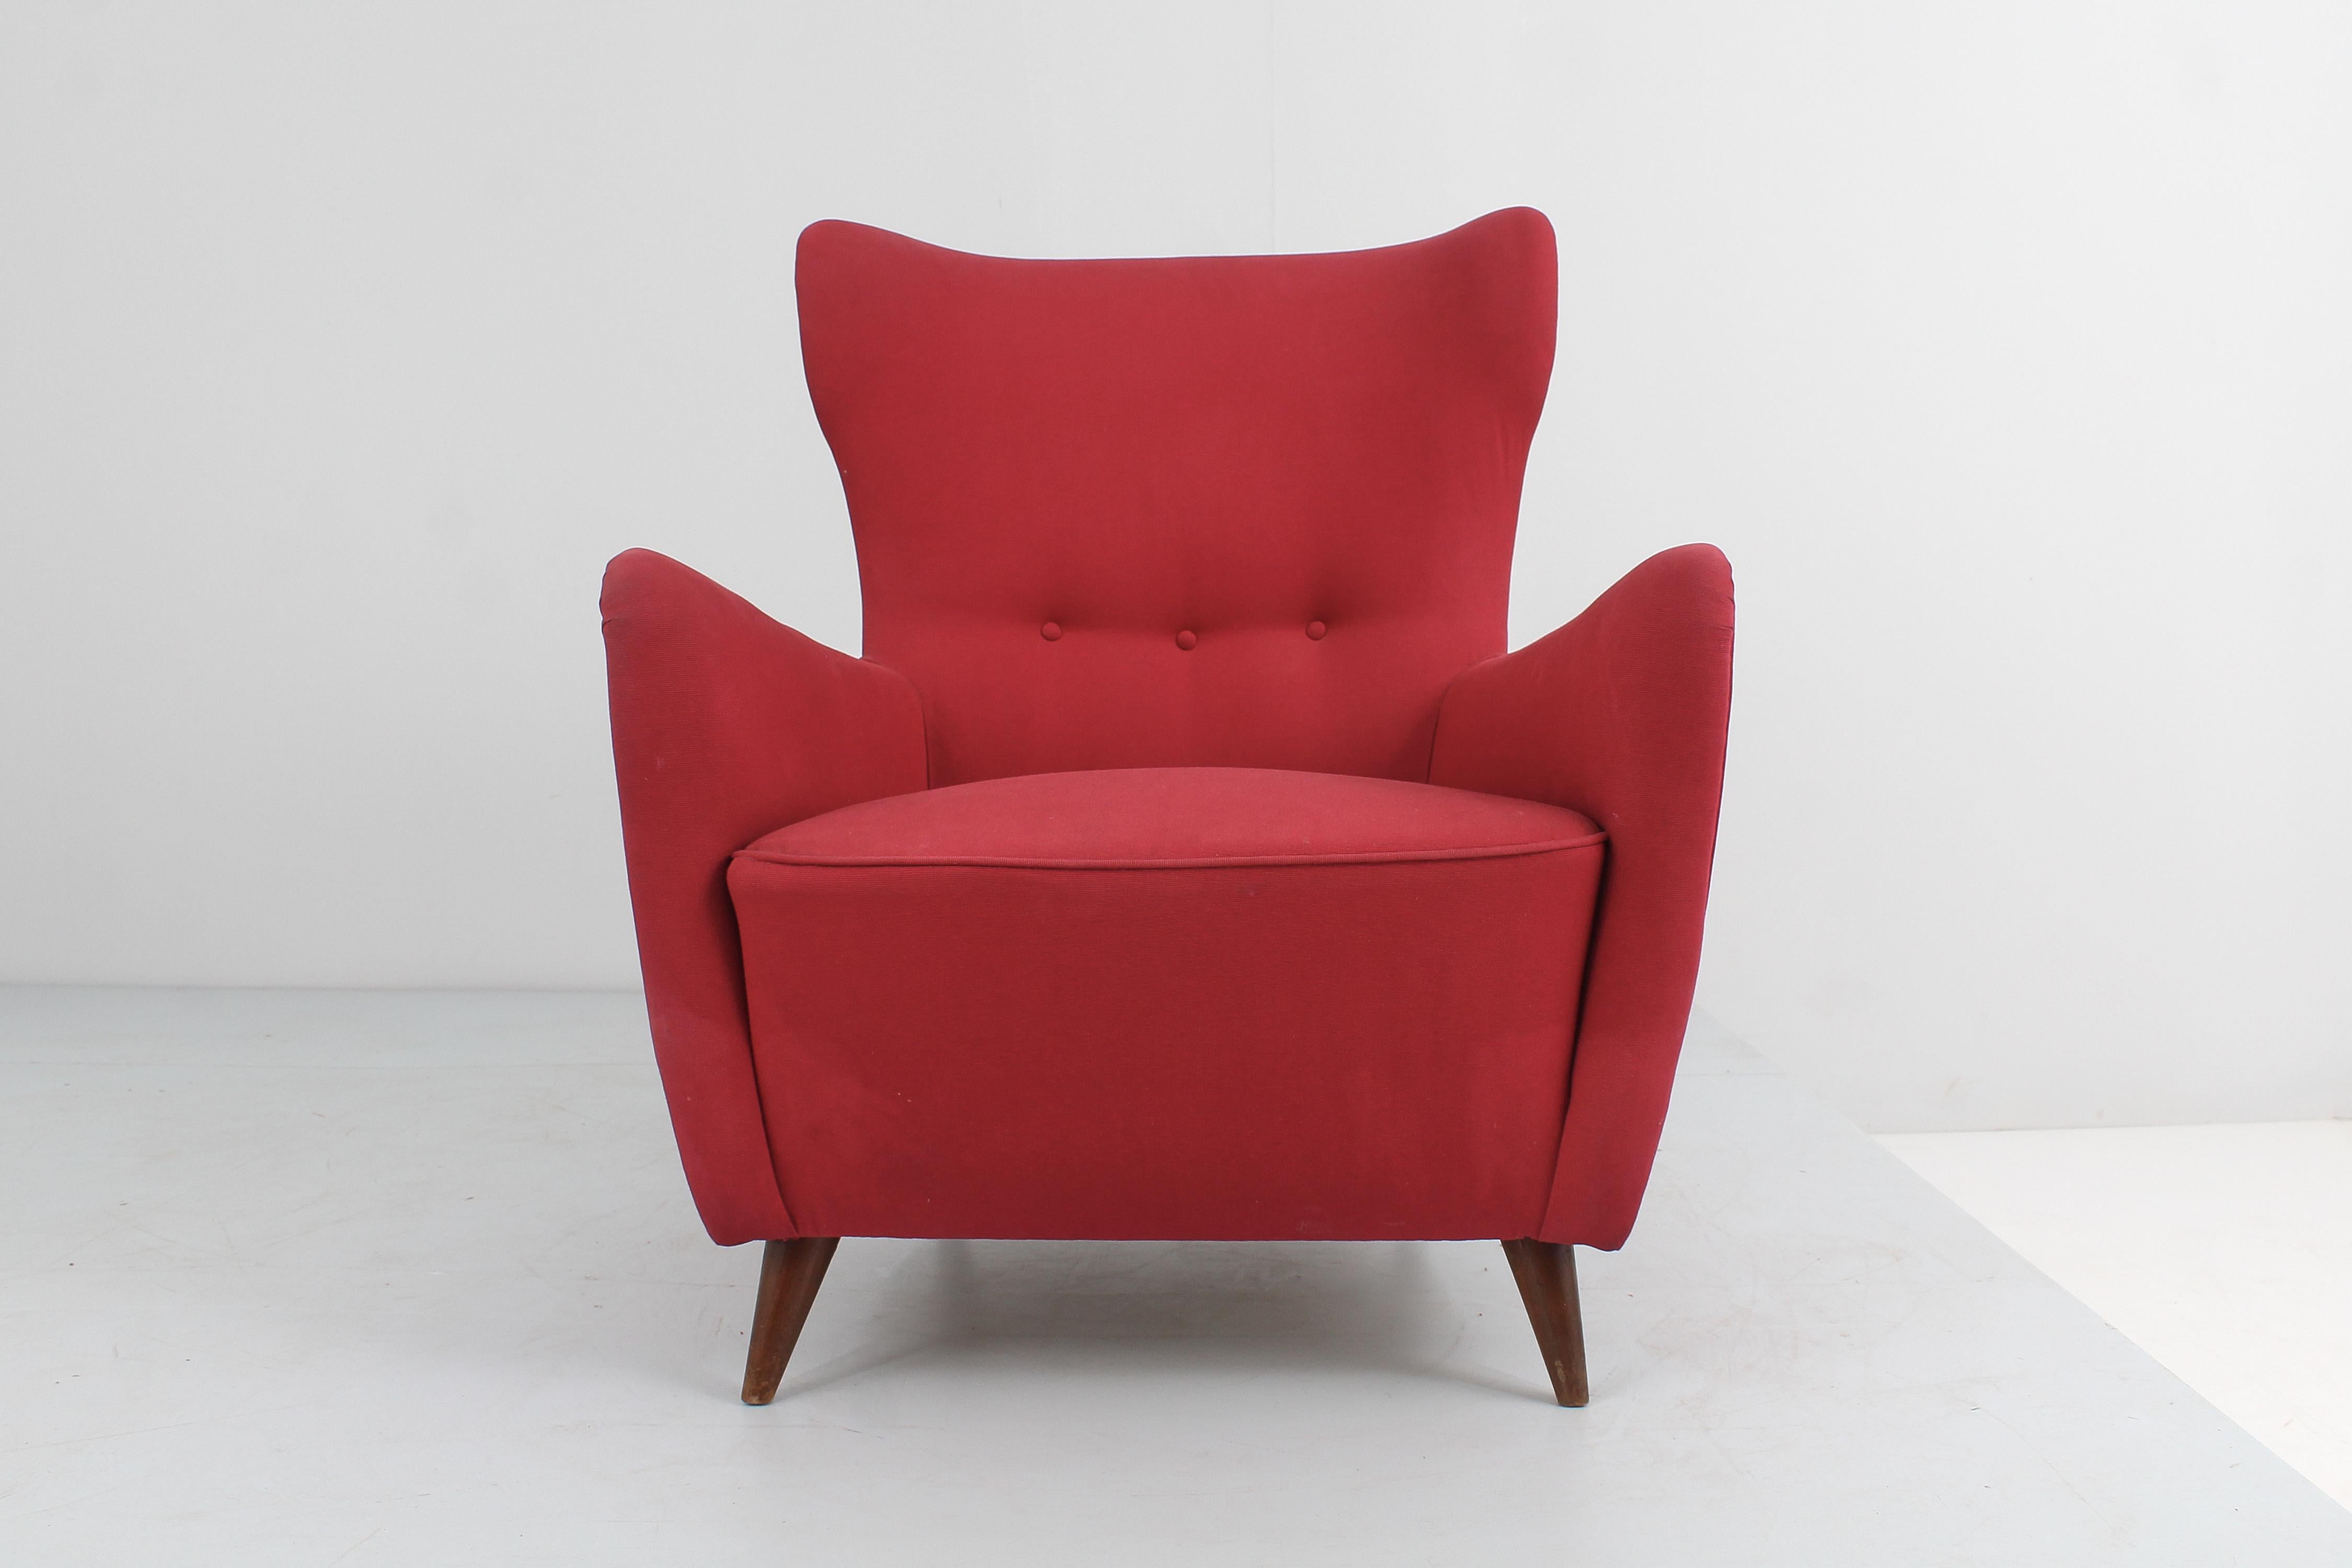 Midcentury Giò Ponti Style Wood and Red Fabric Armchair, circa 1950s Italy  For Sale 6